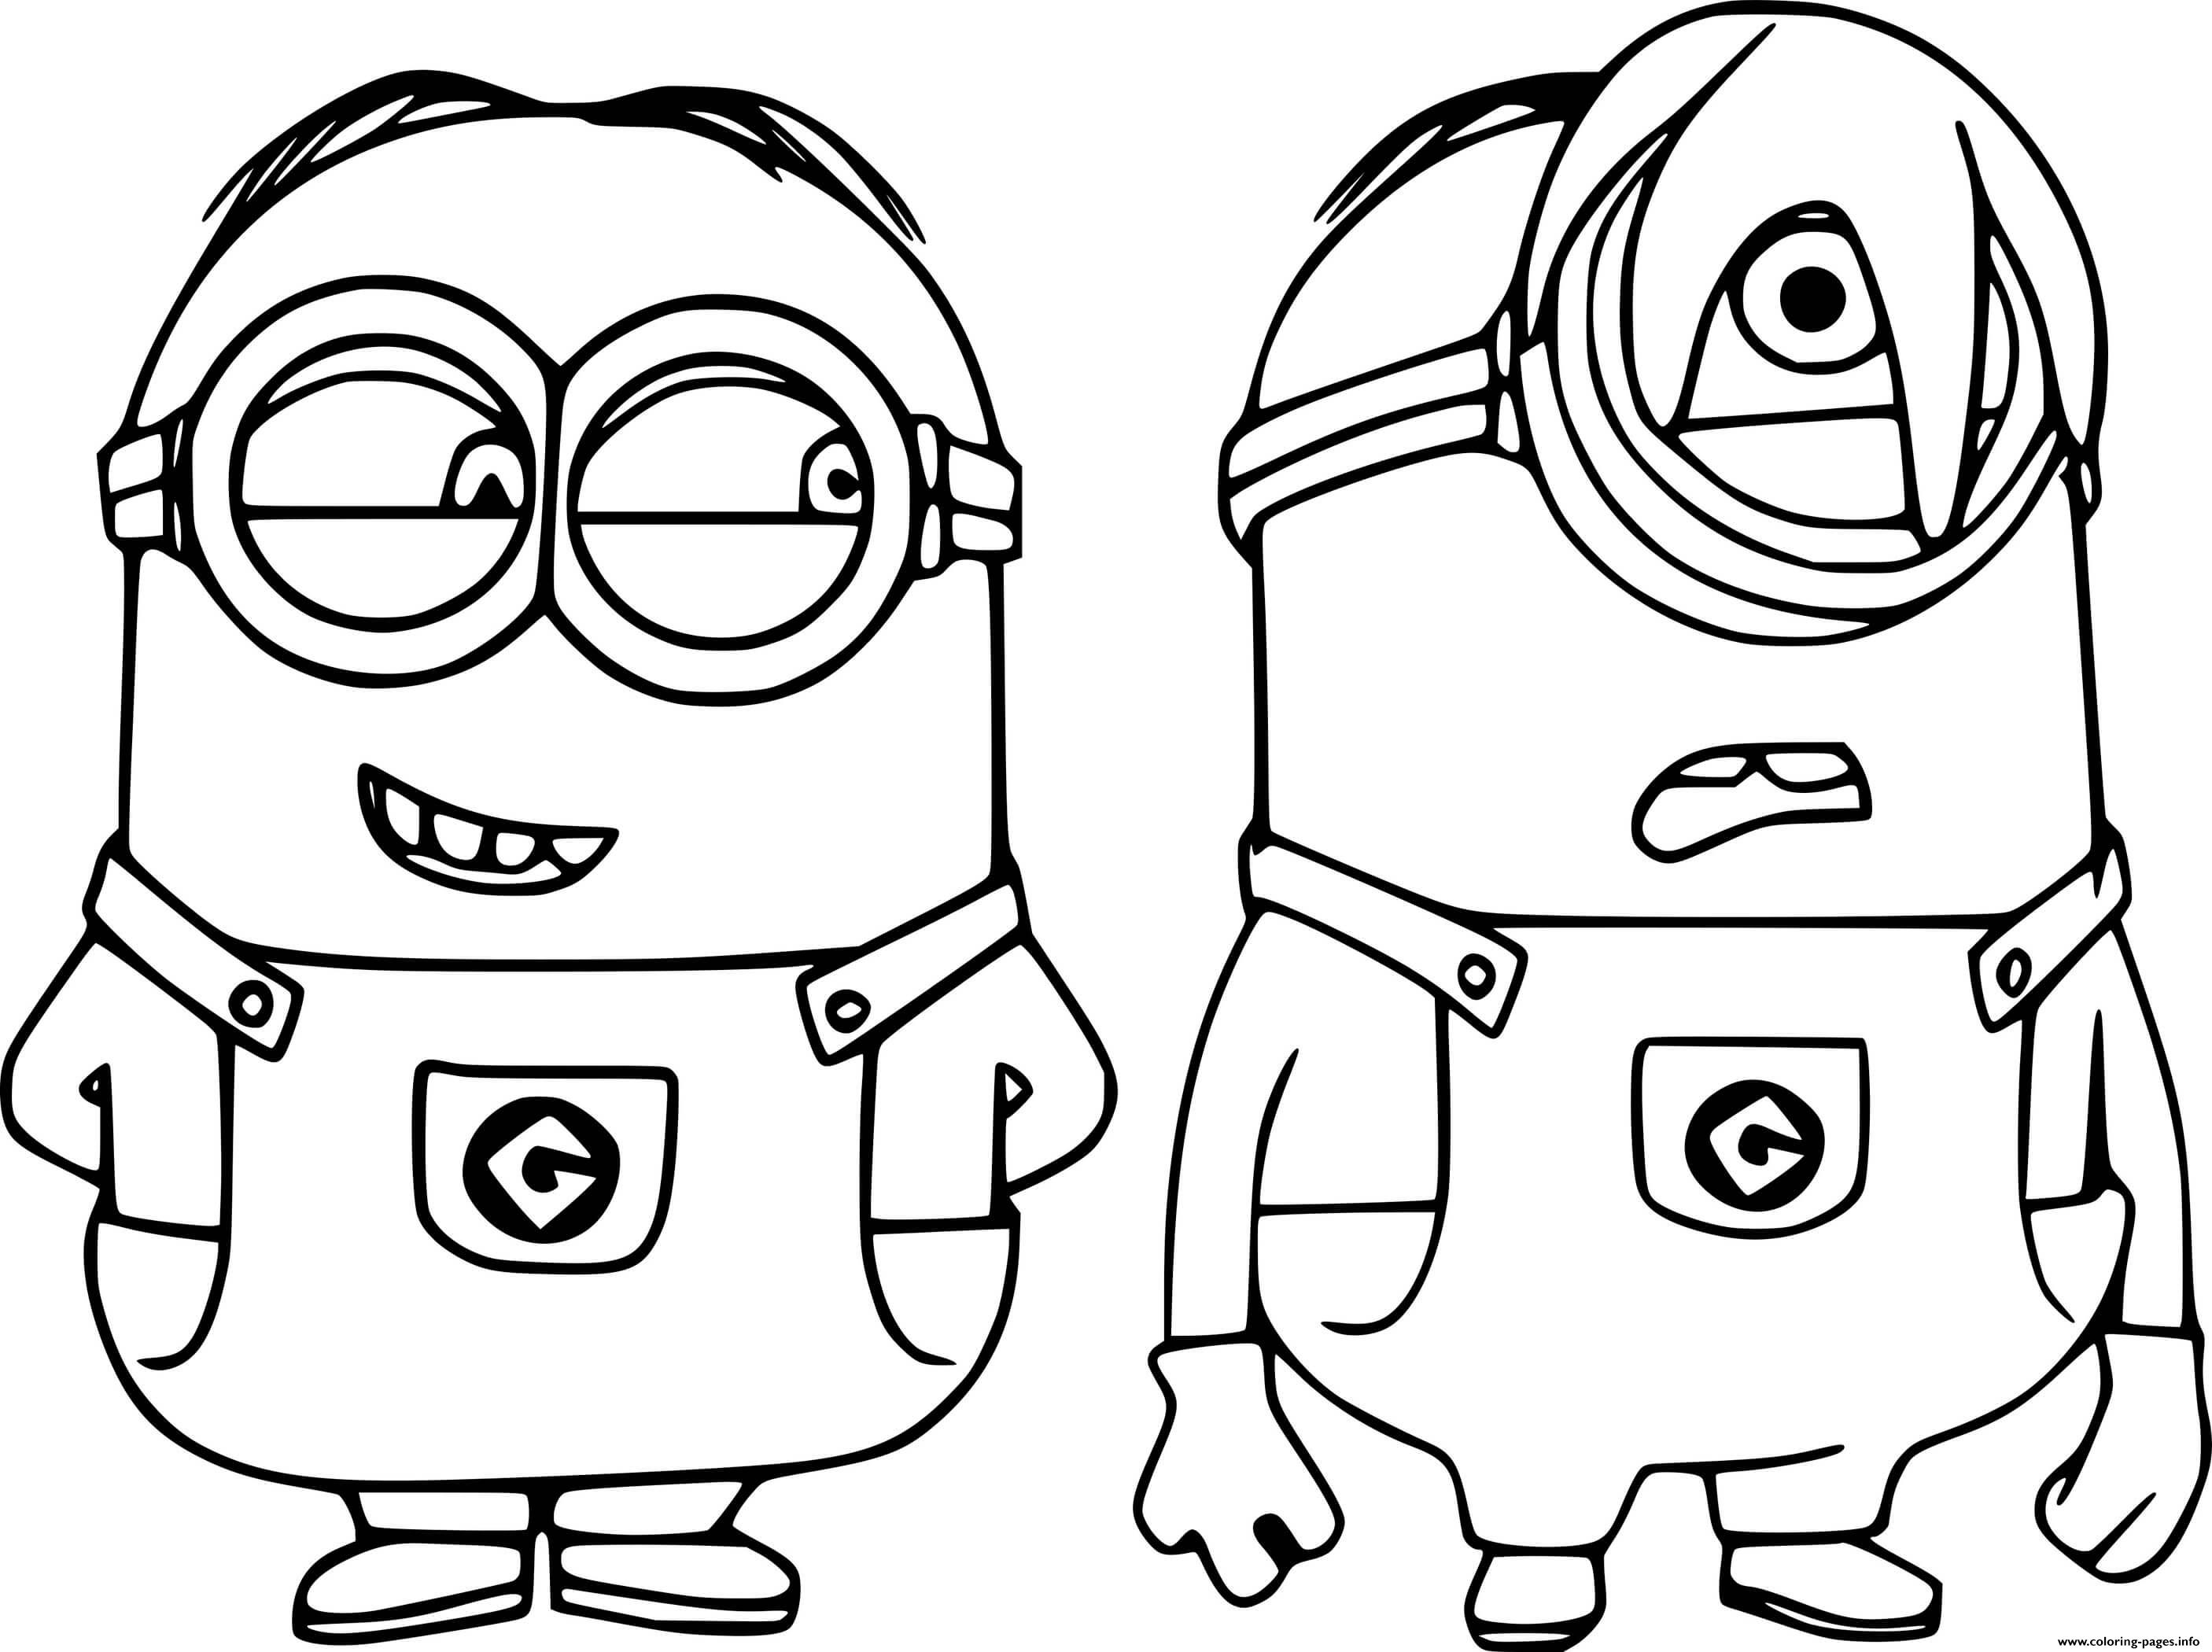 Two Naughty Minions coloring